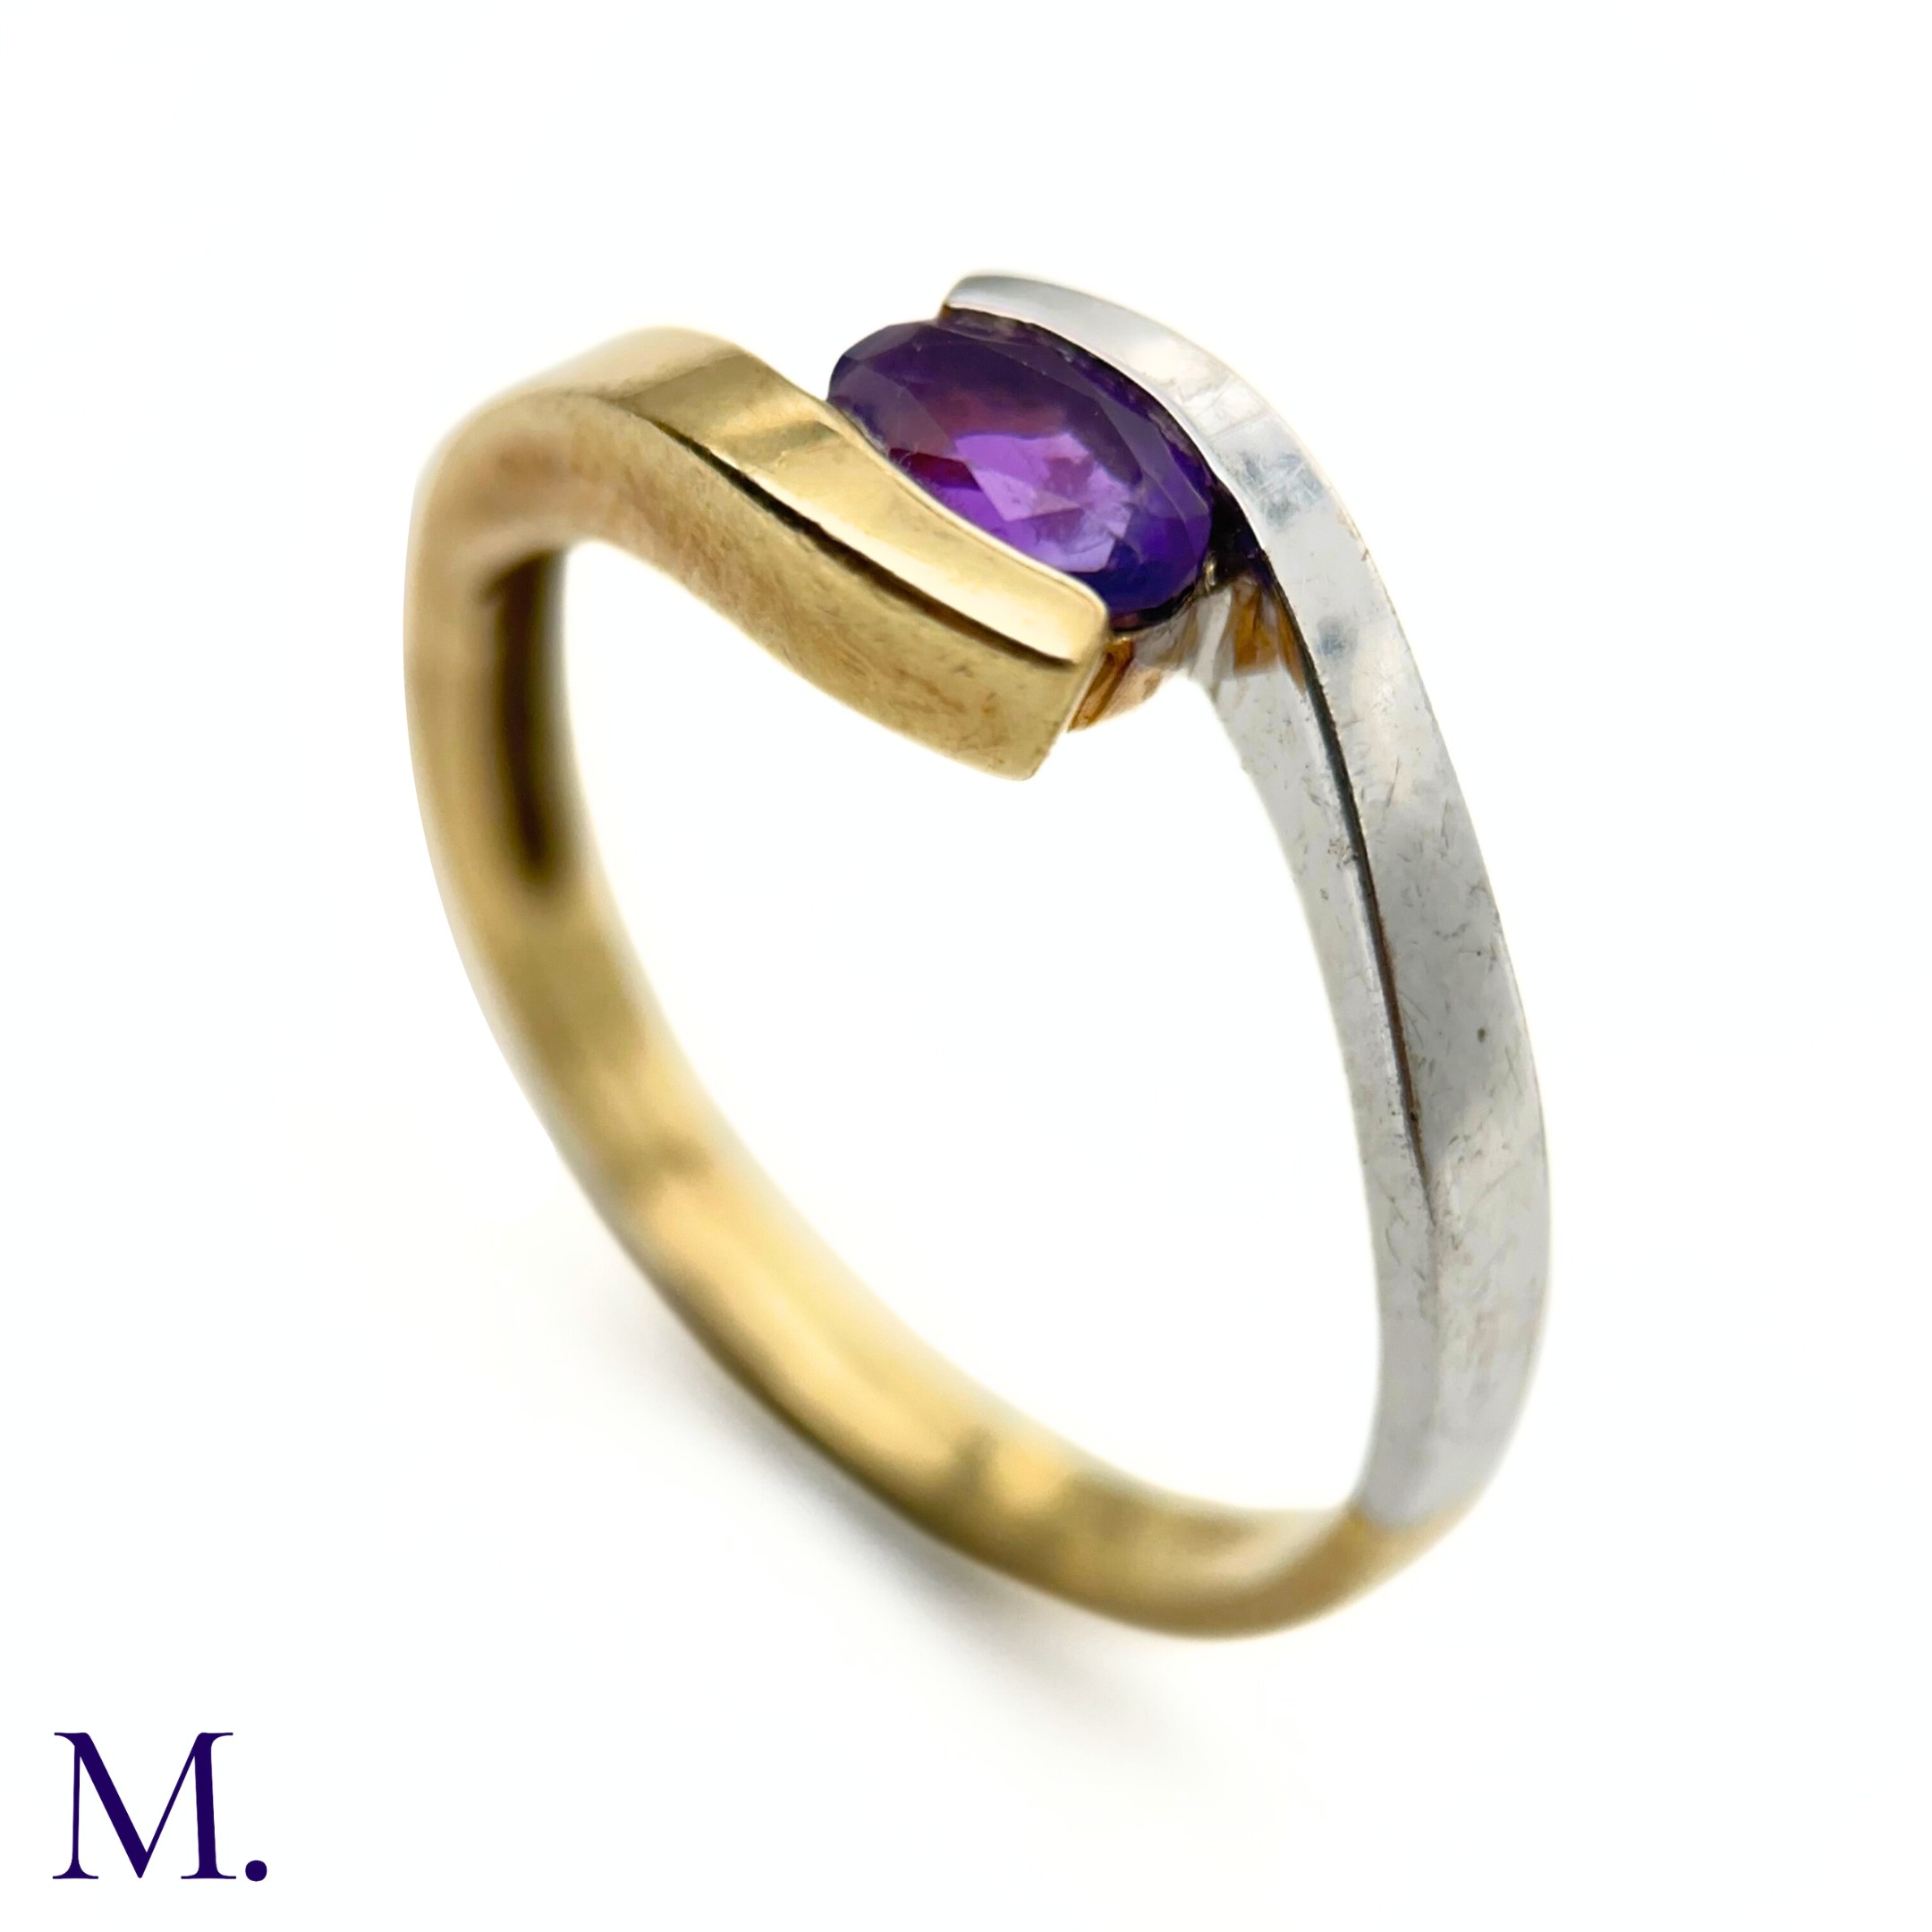 NO RESERVE - A Bi-Colour Gold and Amethyst Ring - Image 5 of 7